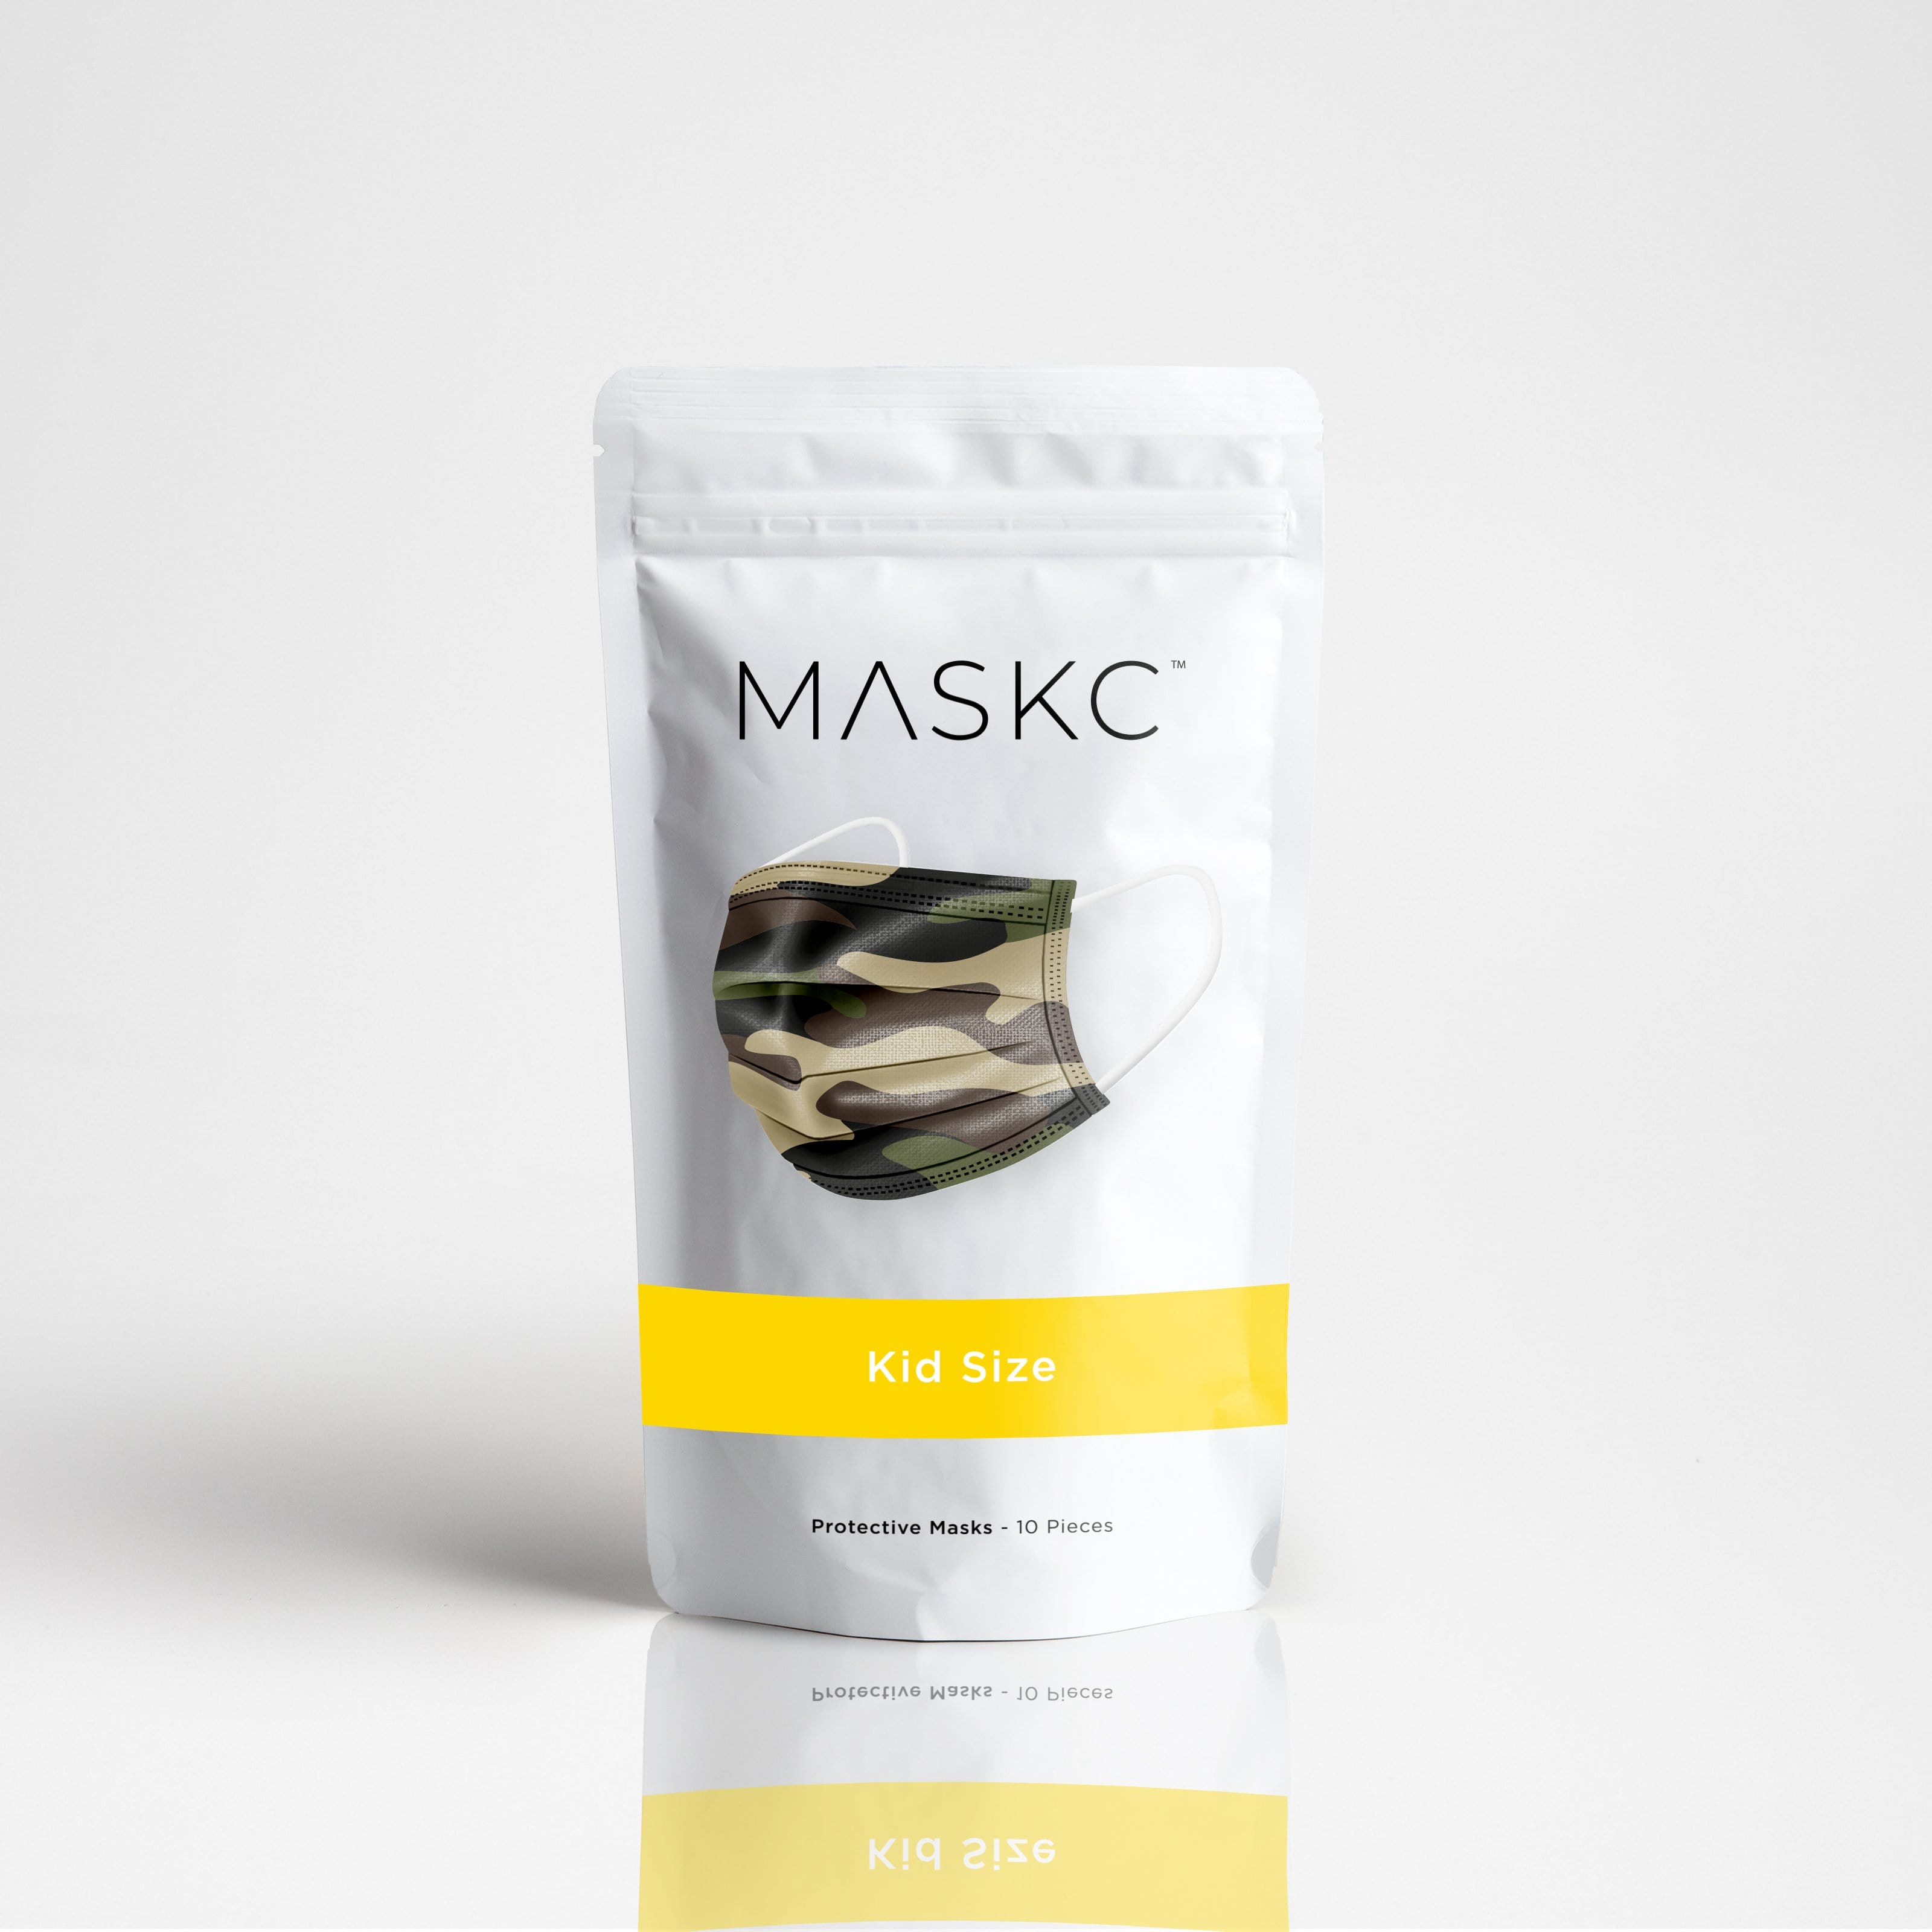 Pack of Green Camo face masks. Each pack contains stylish high quality face masks. 